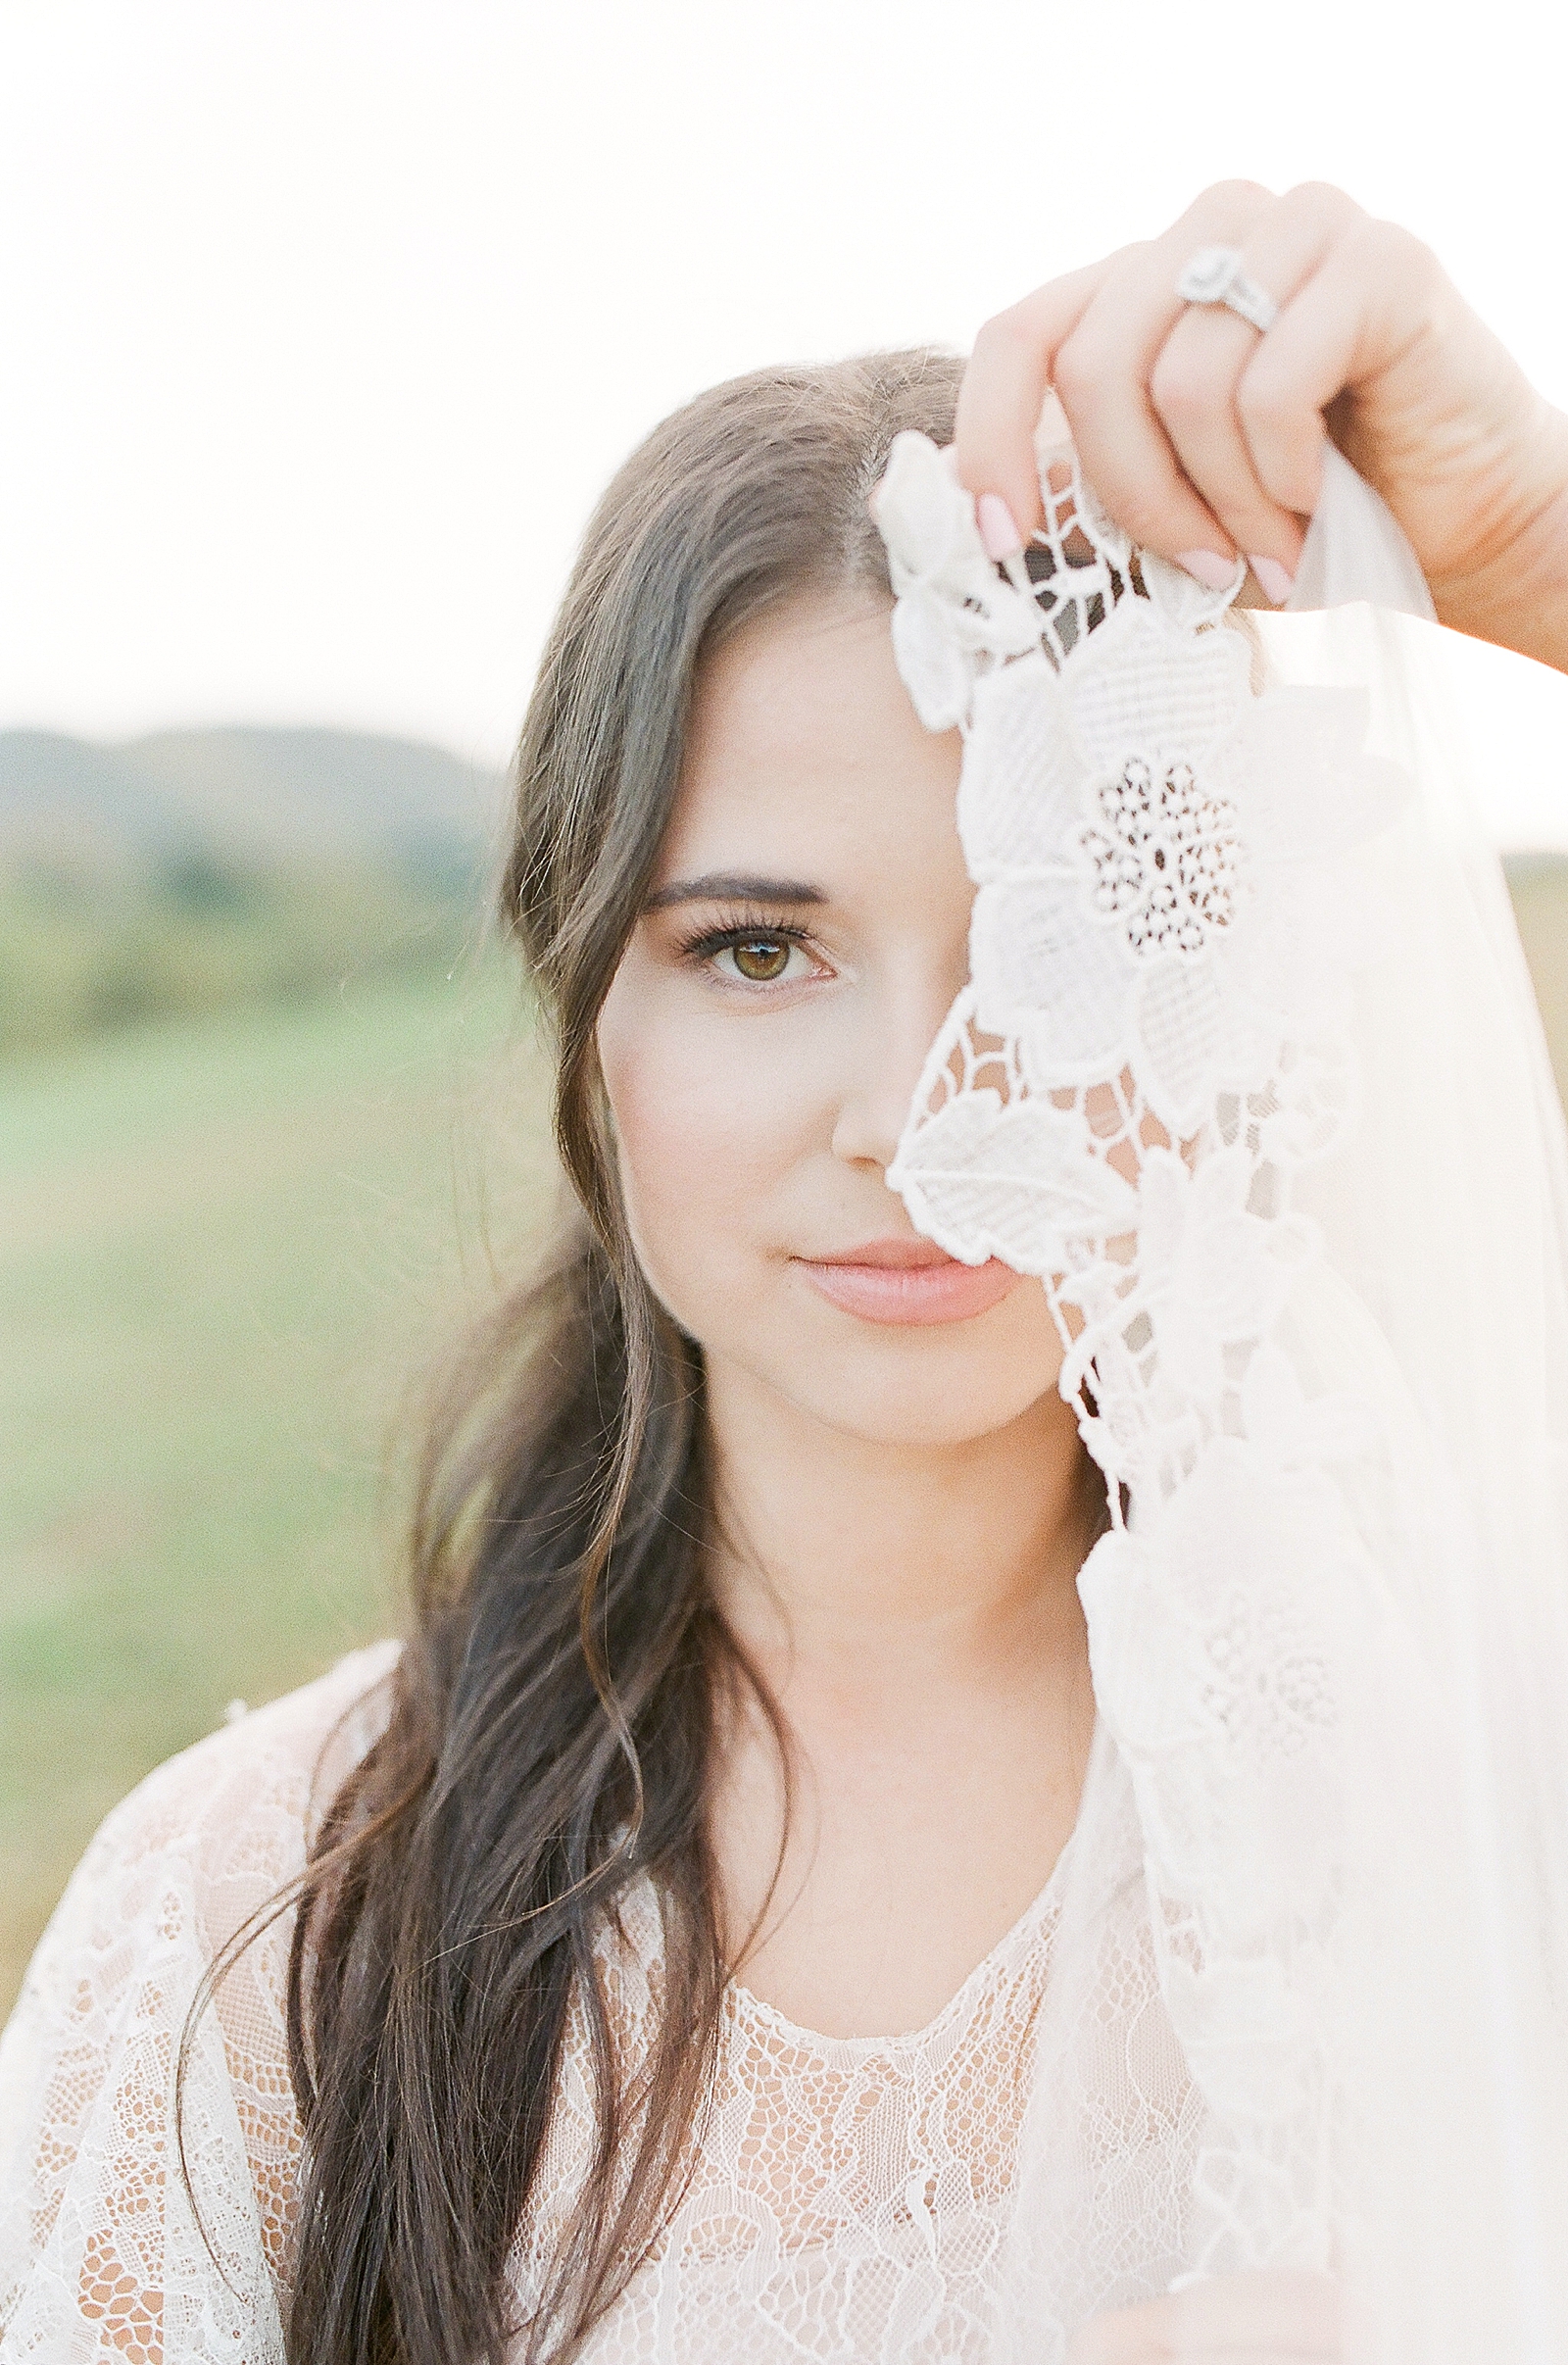 Asheville Wedding Photographer Bridal Editorial Bride Holding Lace in front of her face Photo